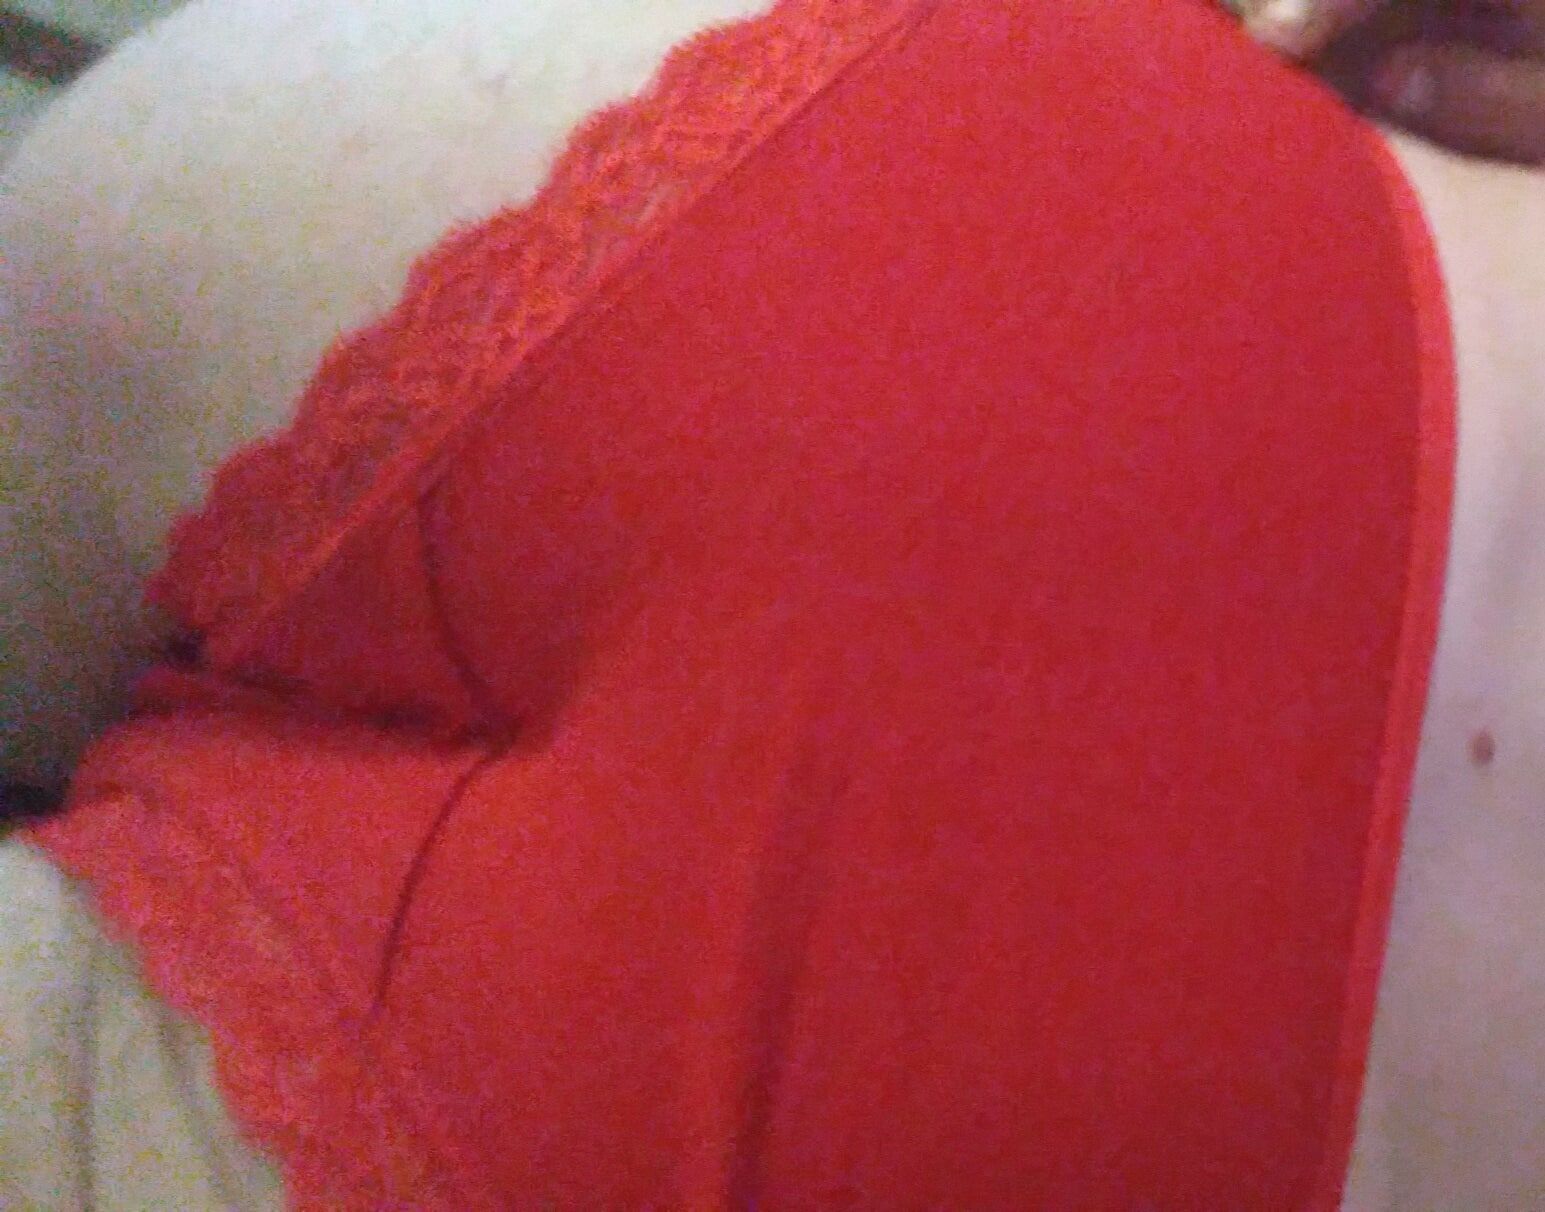 trying on my stepsister's panties #6